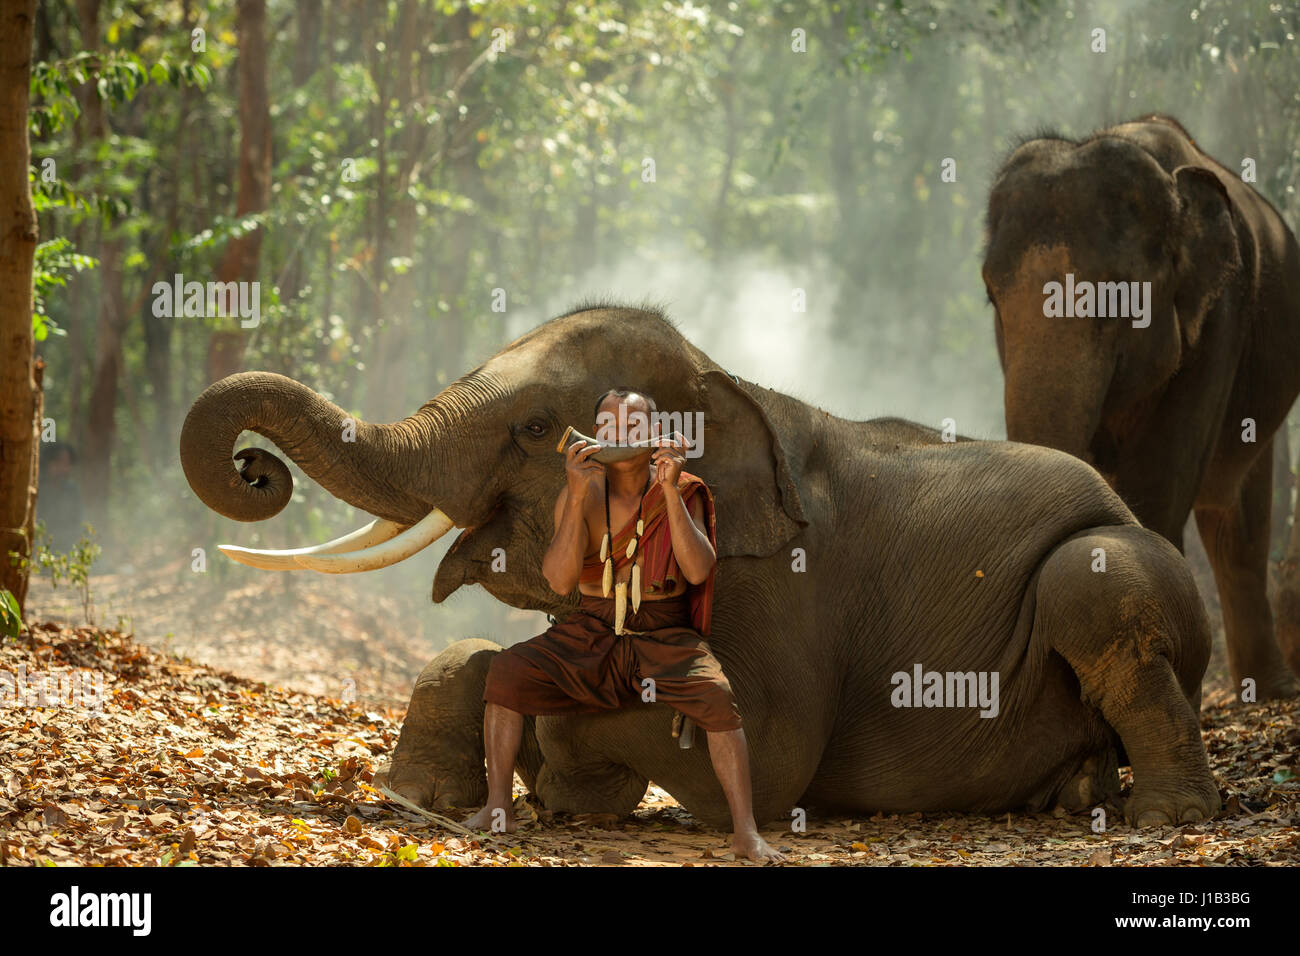 Thailand the mahout are playing the dryer with elephants of Thai culture Stock Photo